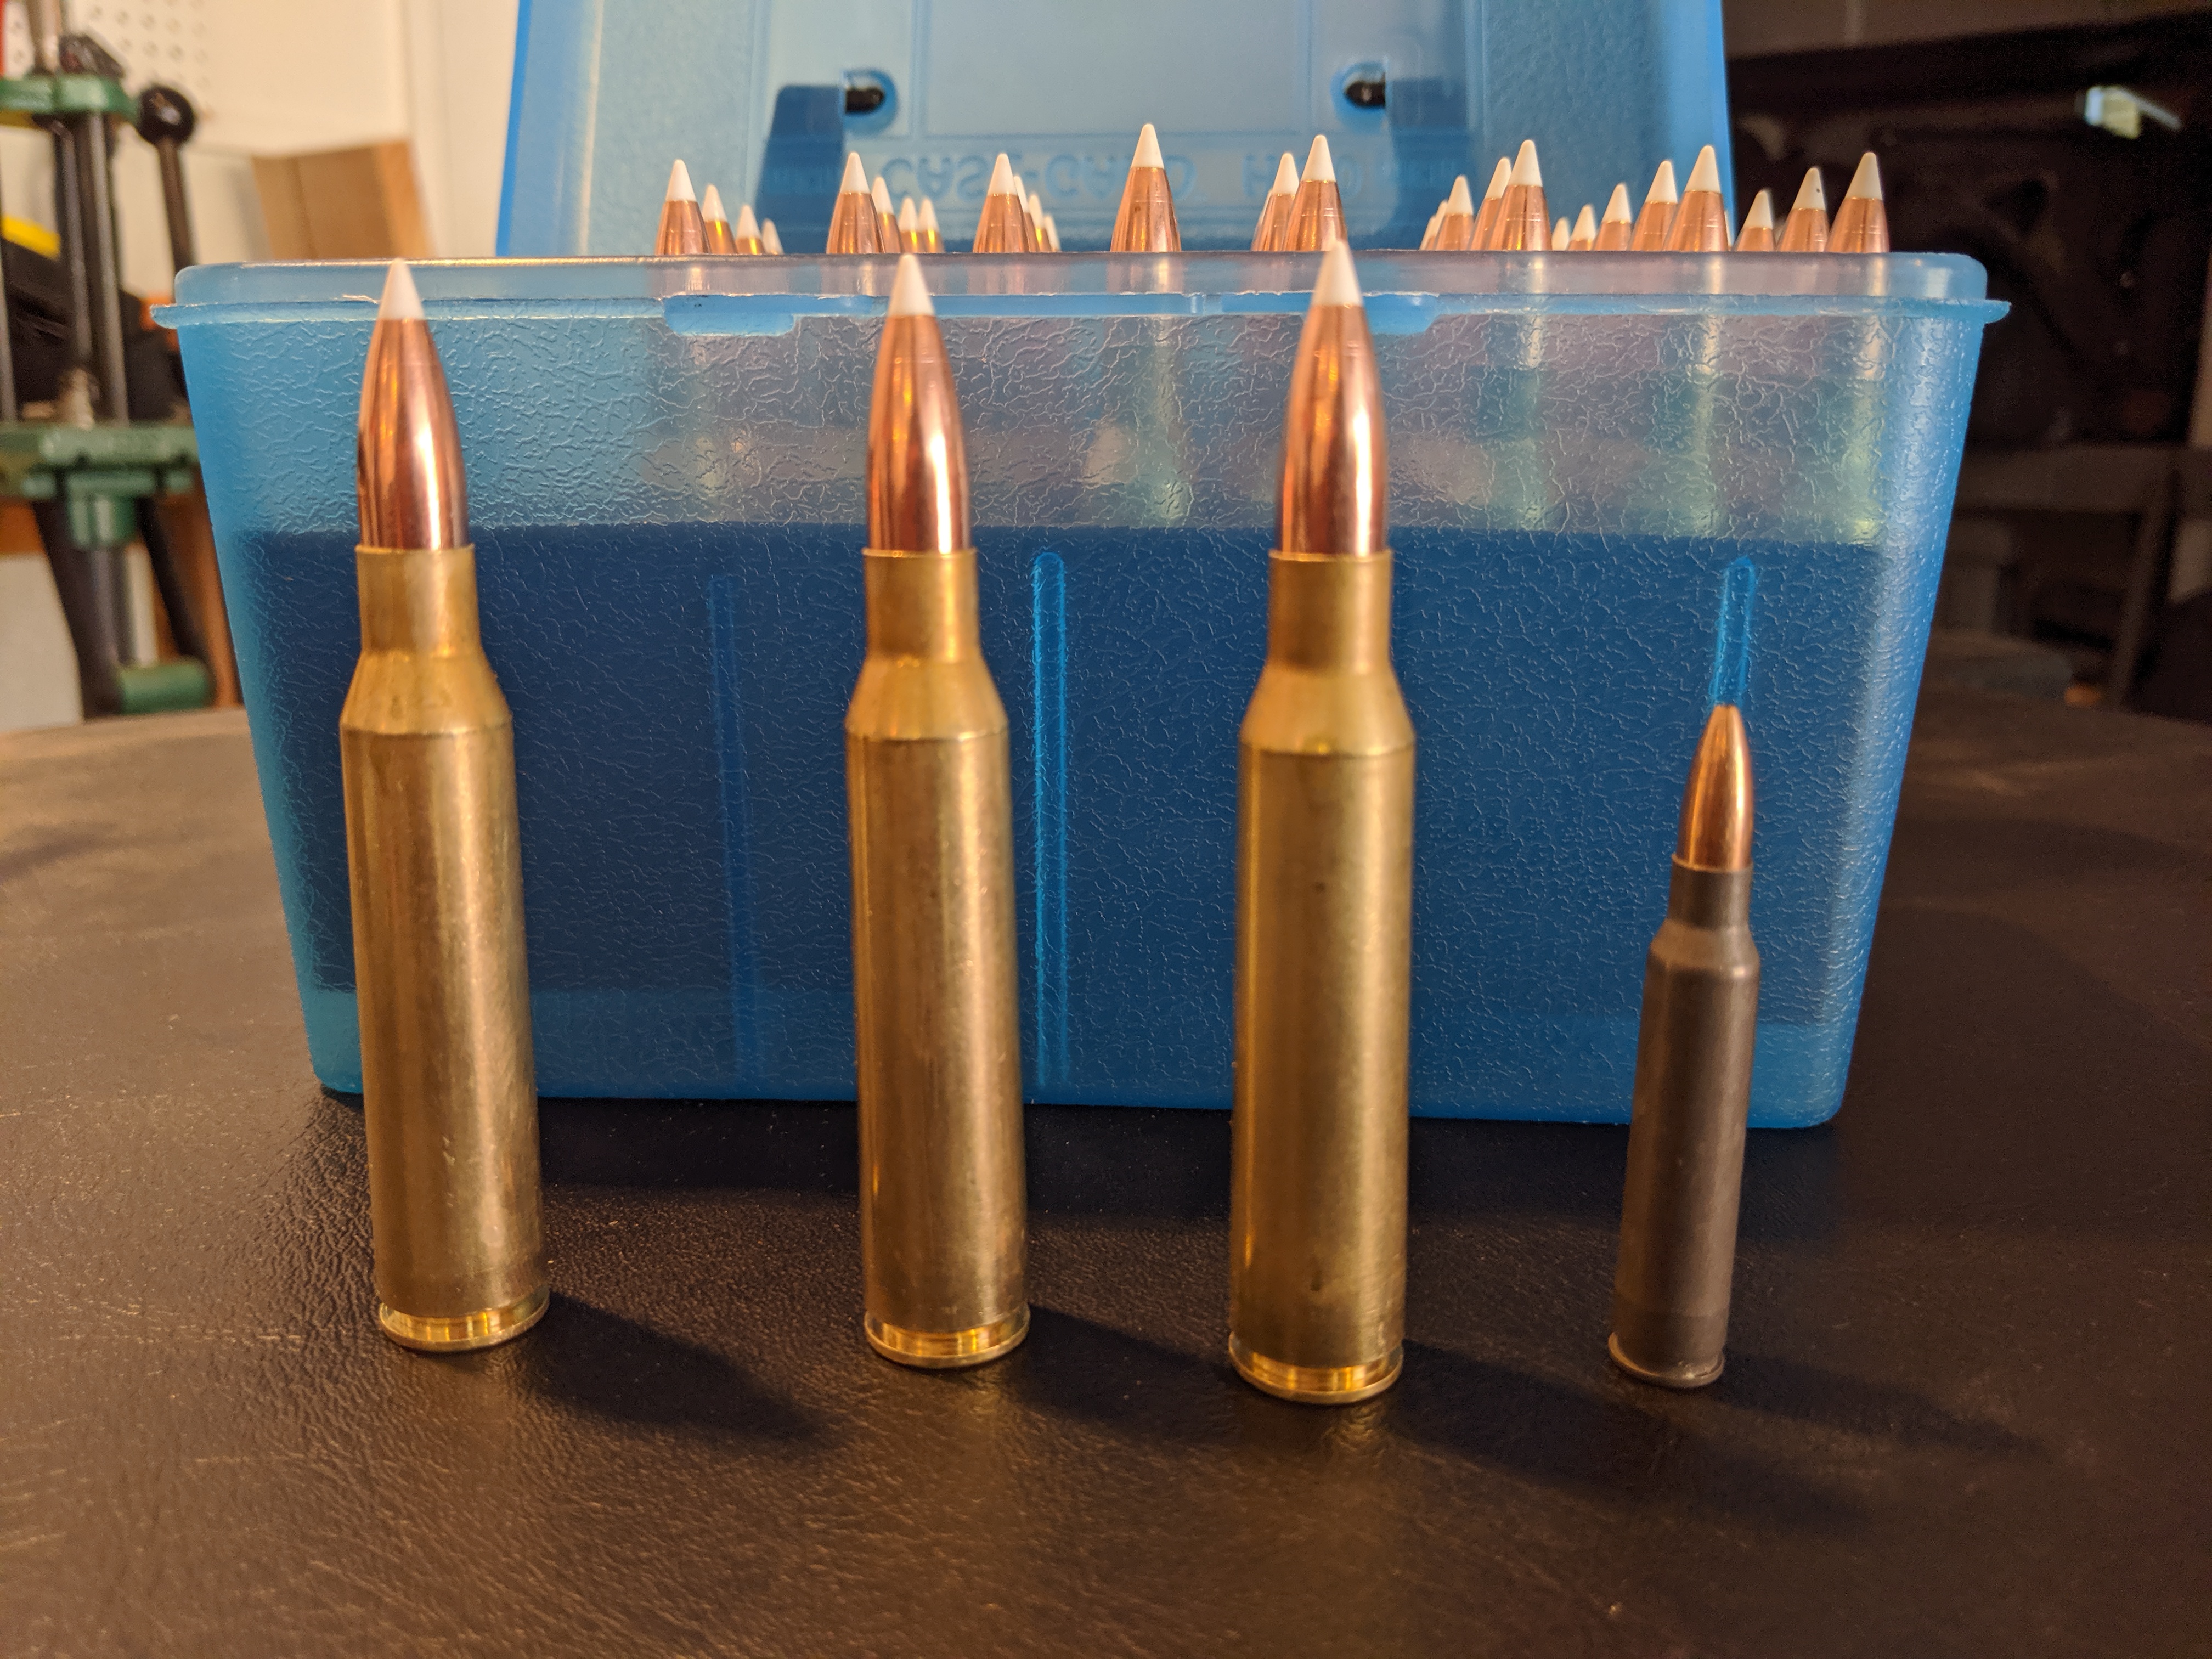 338 Lapua Magnum rounds all clean and loaded - Steemit.